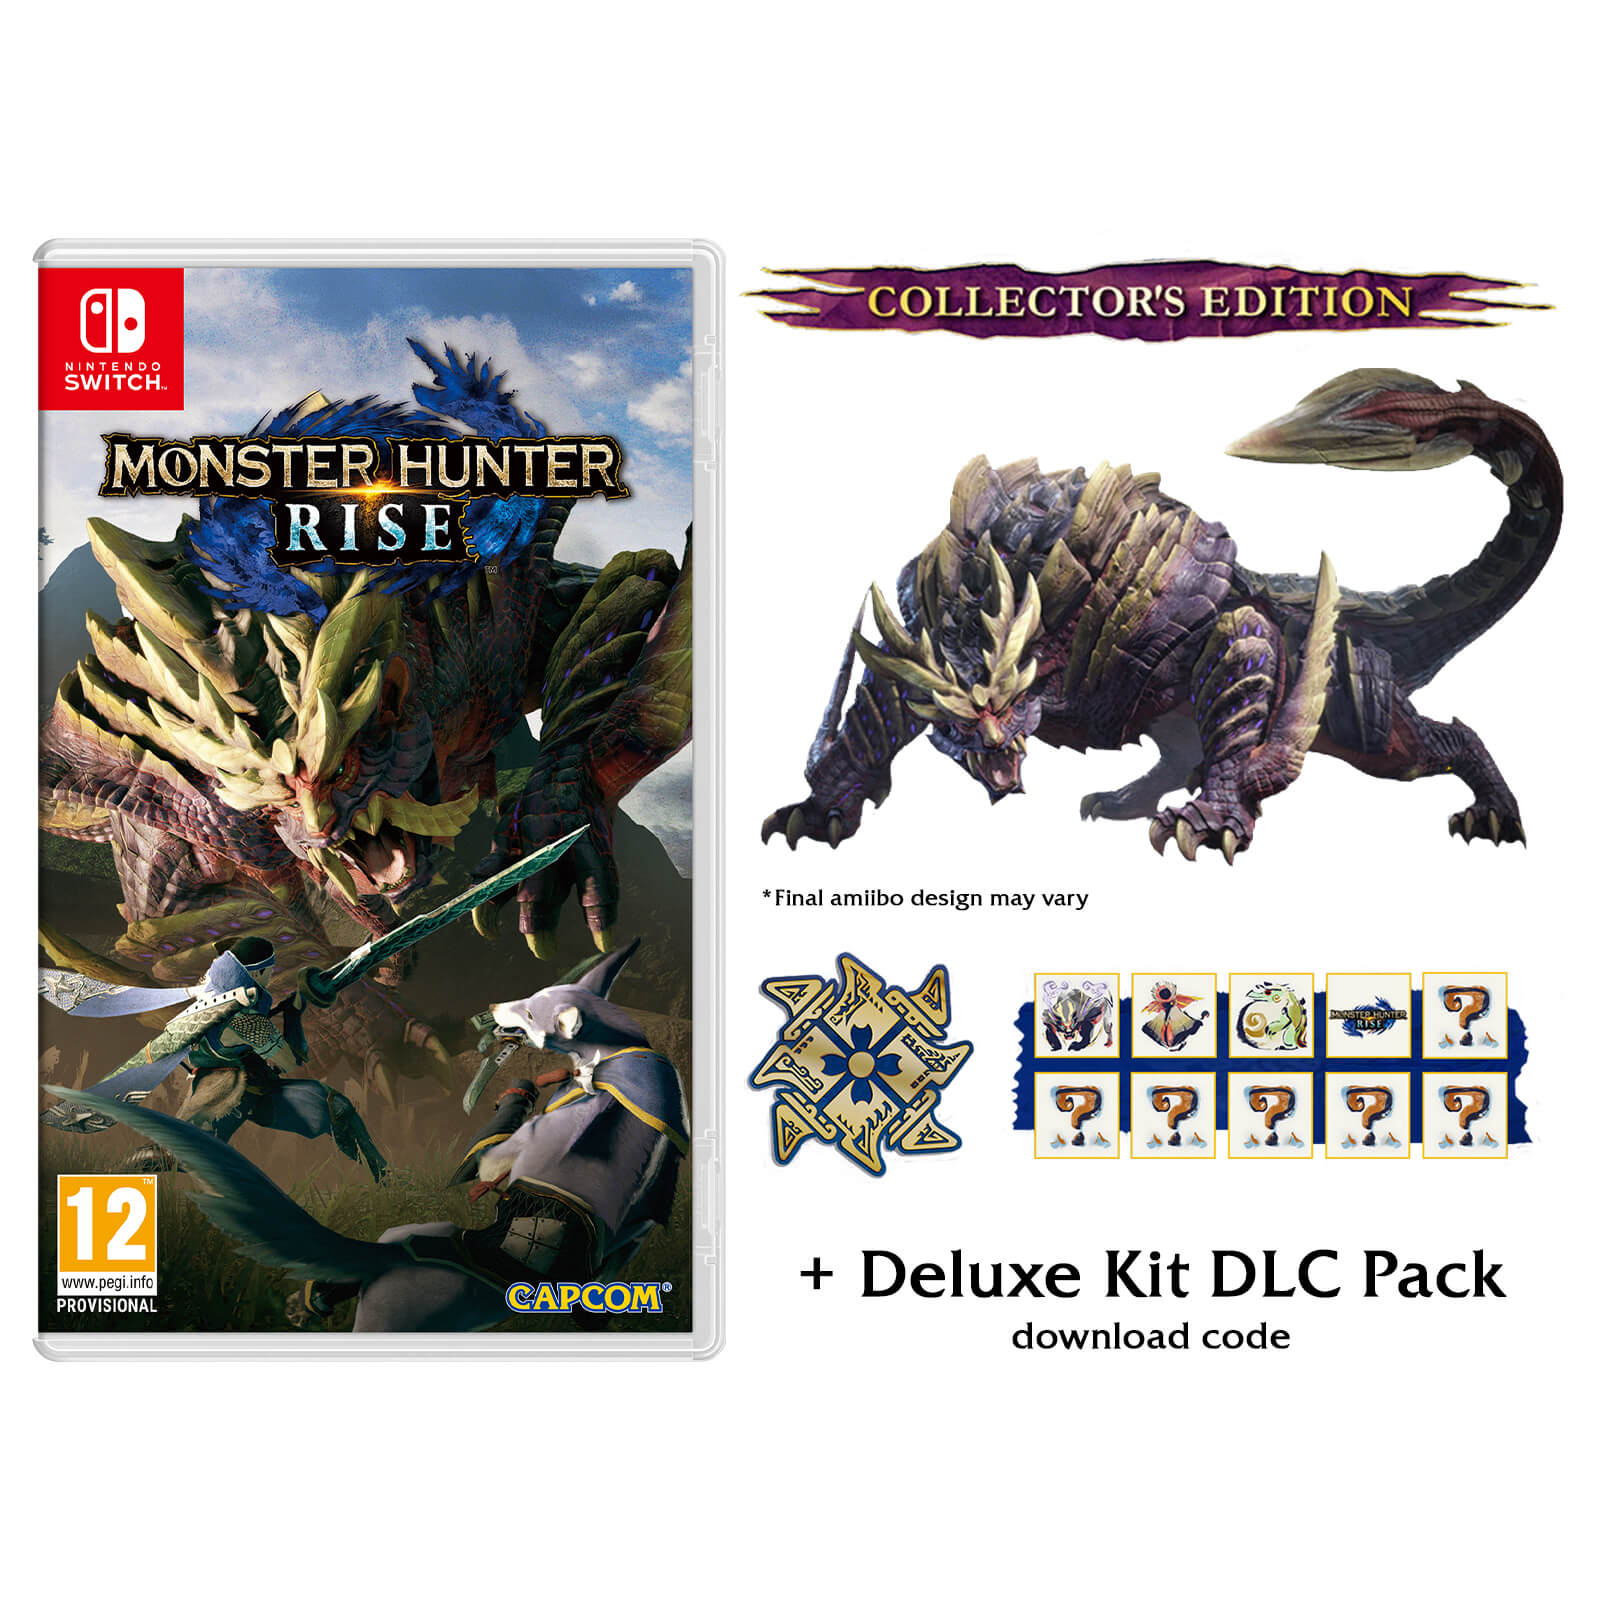 Monster Hunter Rise up for pre-order on Amazon UK and Nintendo UK store,  including collector's edition